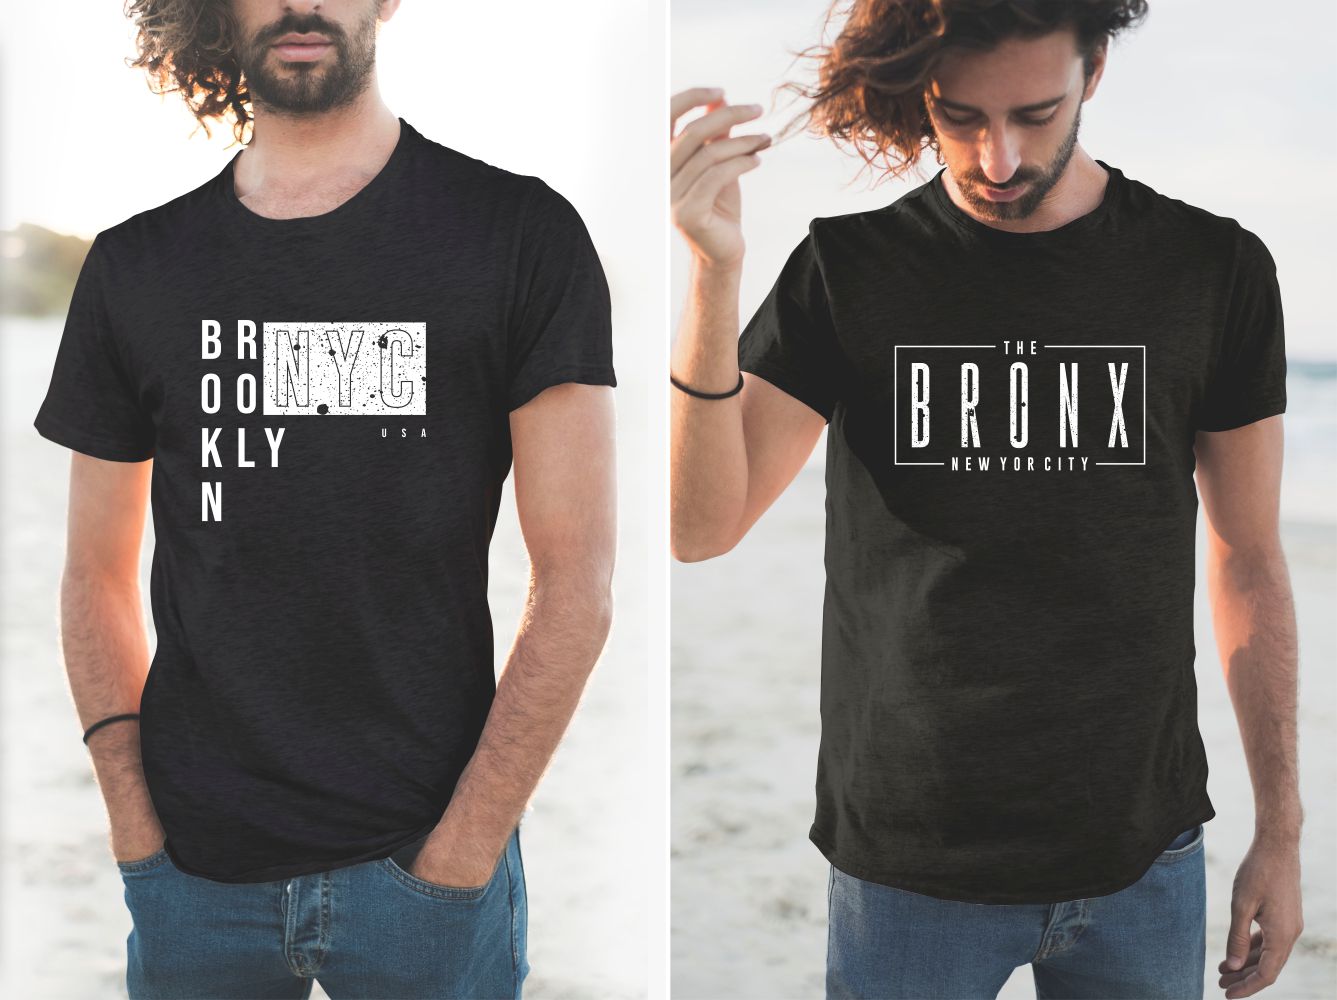 Two black T-shirts with the name of the New York Borough.